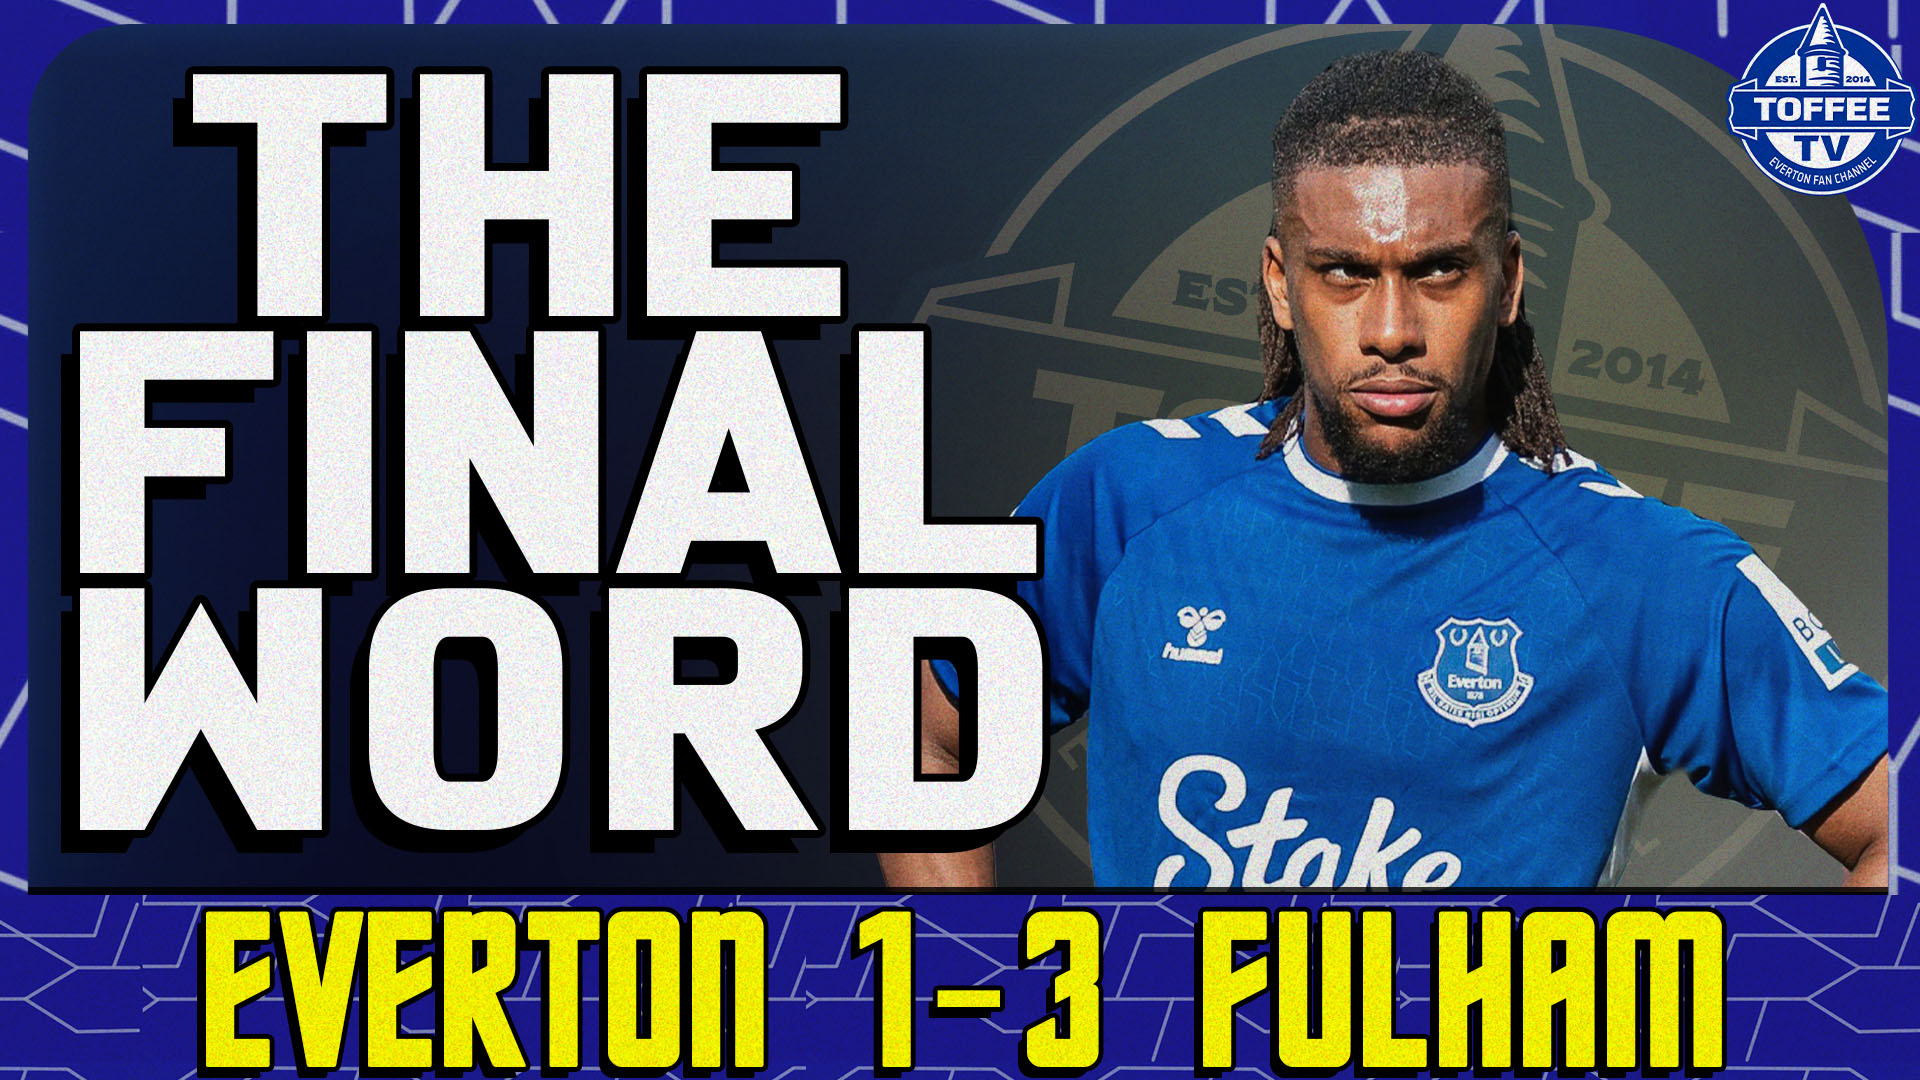 Featured image for “VIDEO: Everton 1-3 Fulham | The Final Word”